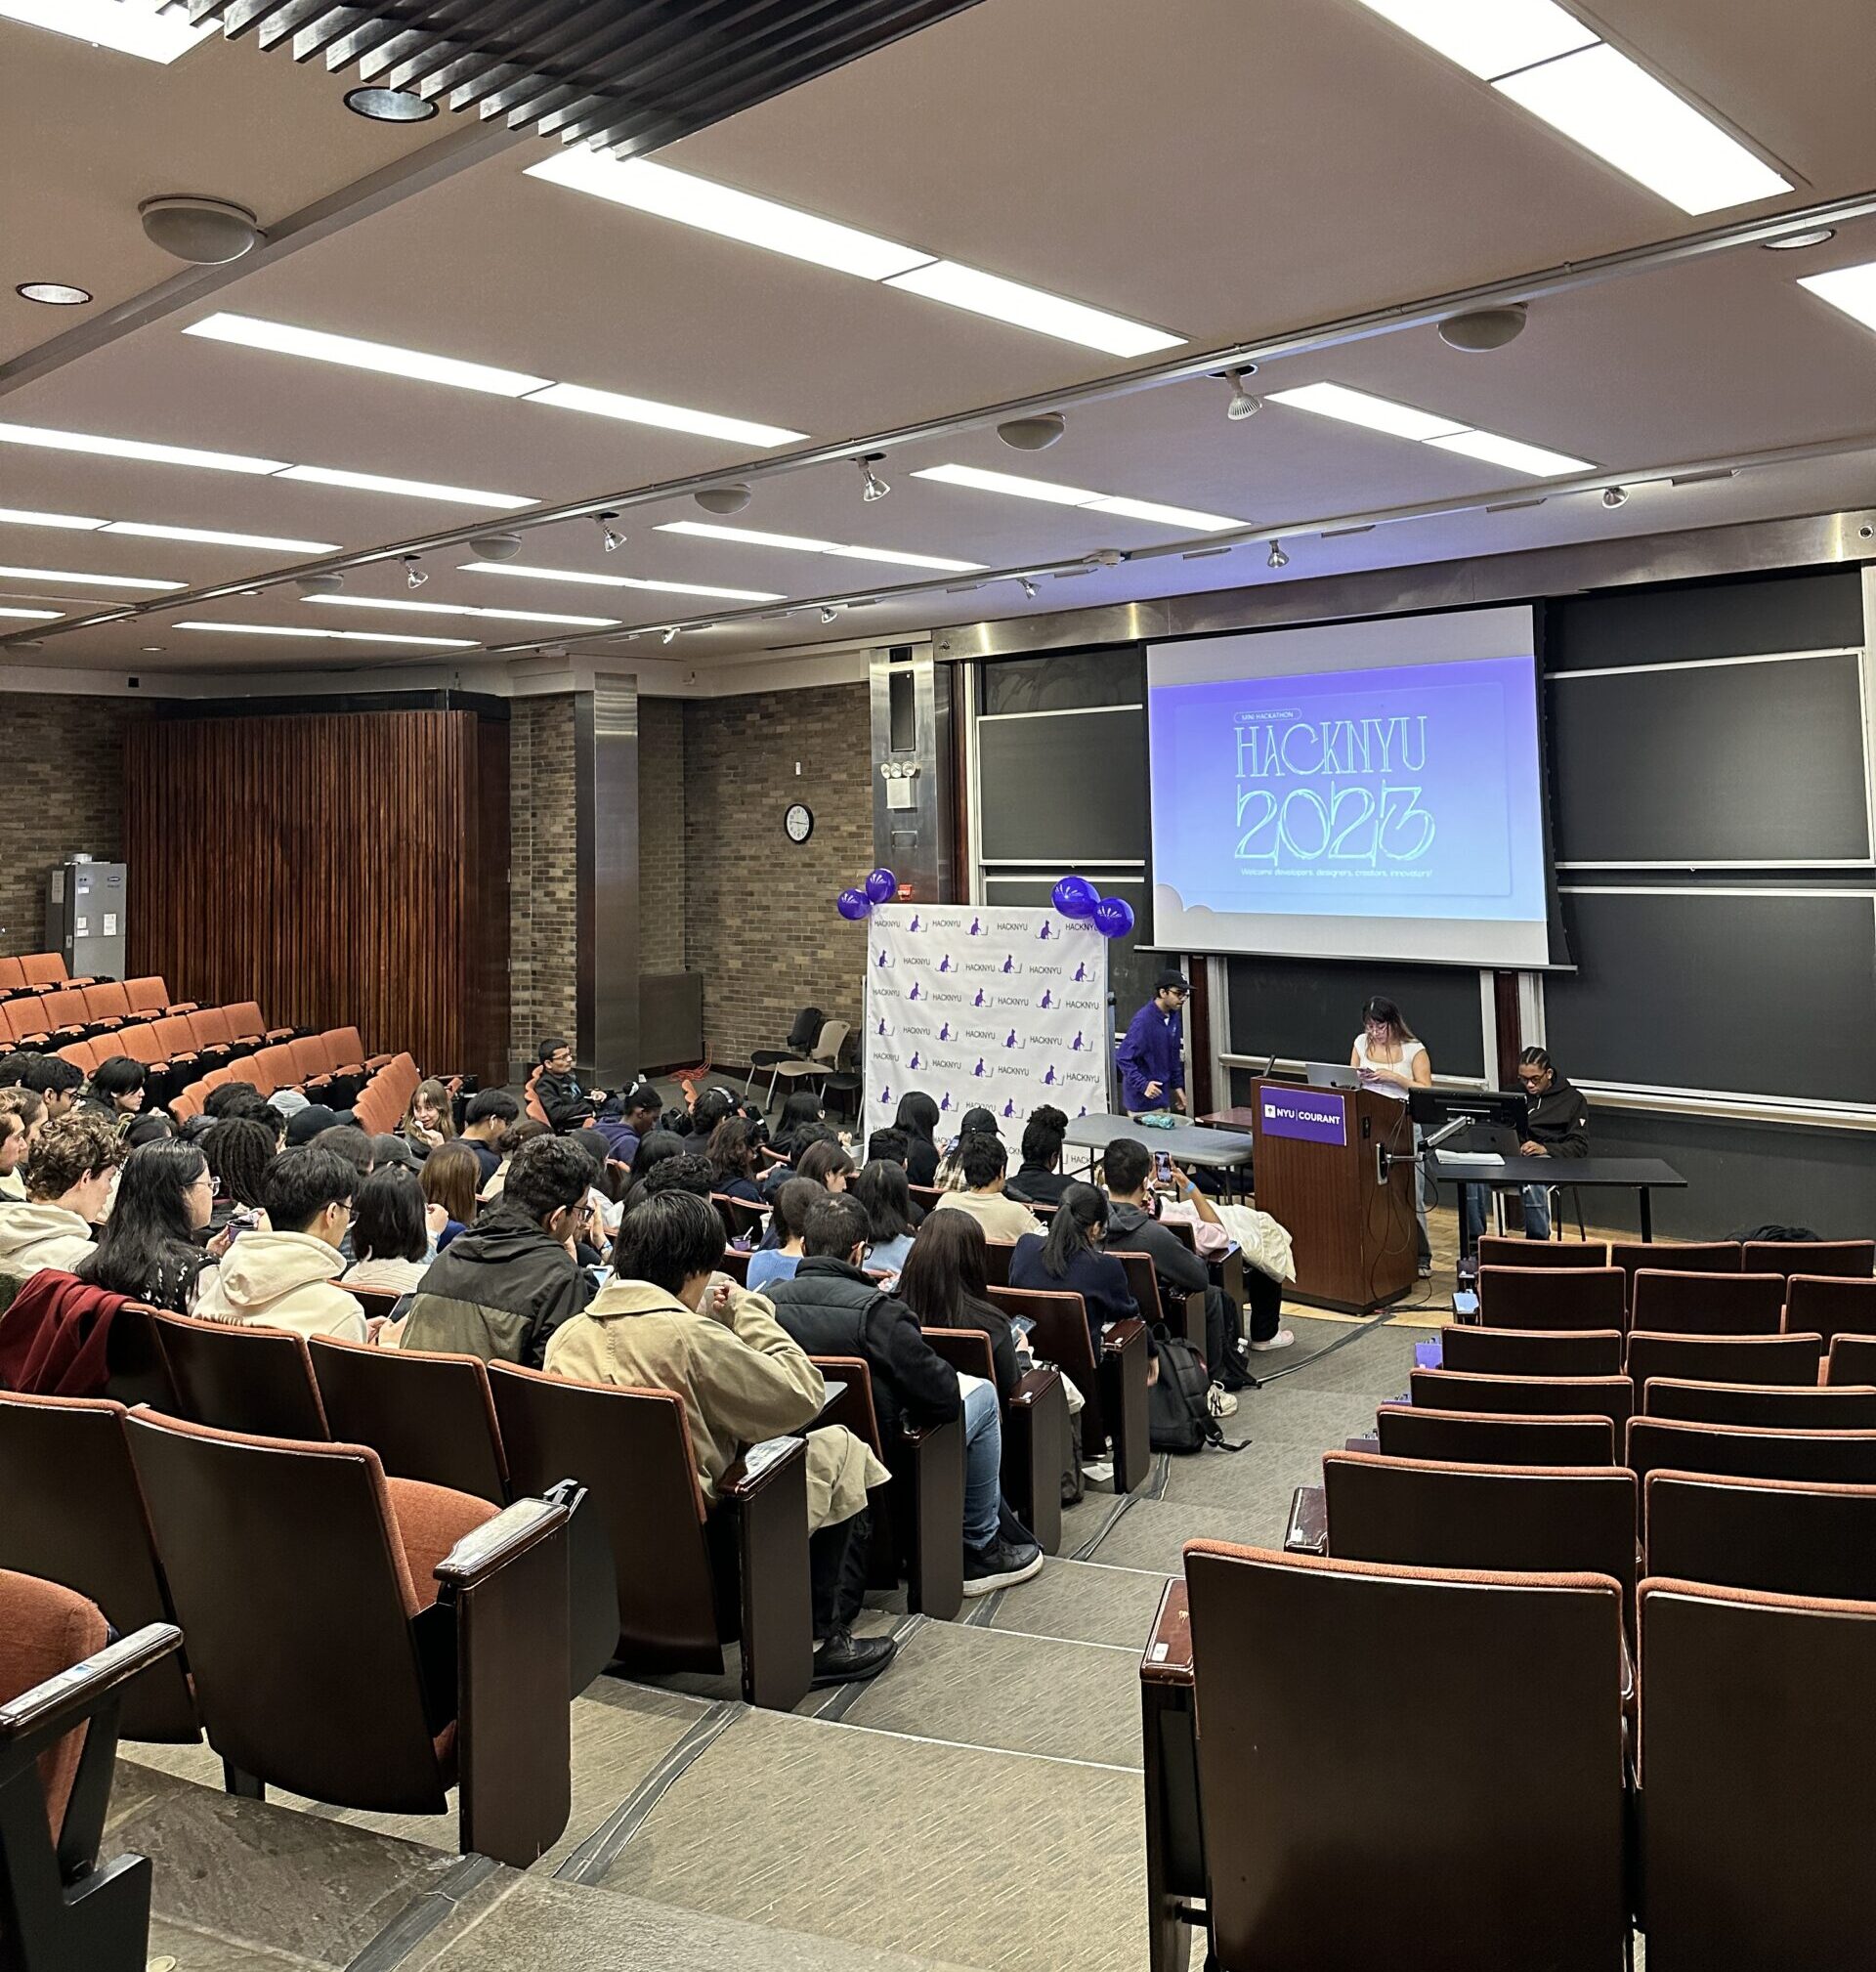 Students attending the 2023 Hackathon opening event in a lecture hall.